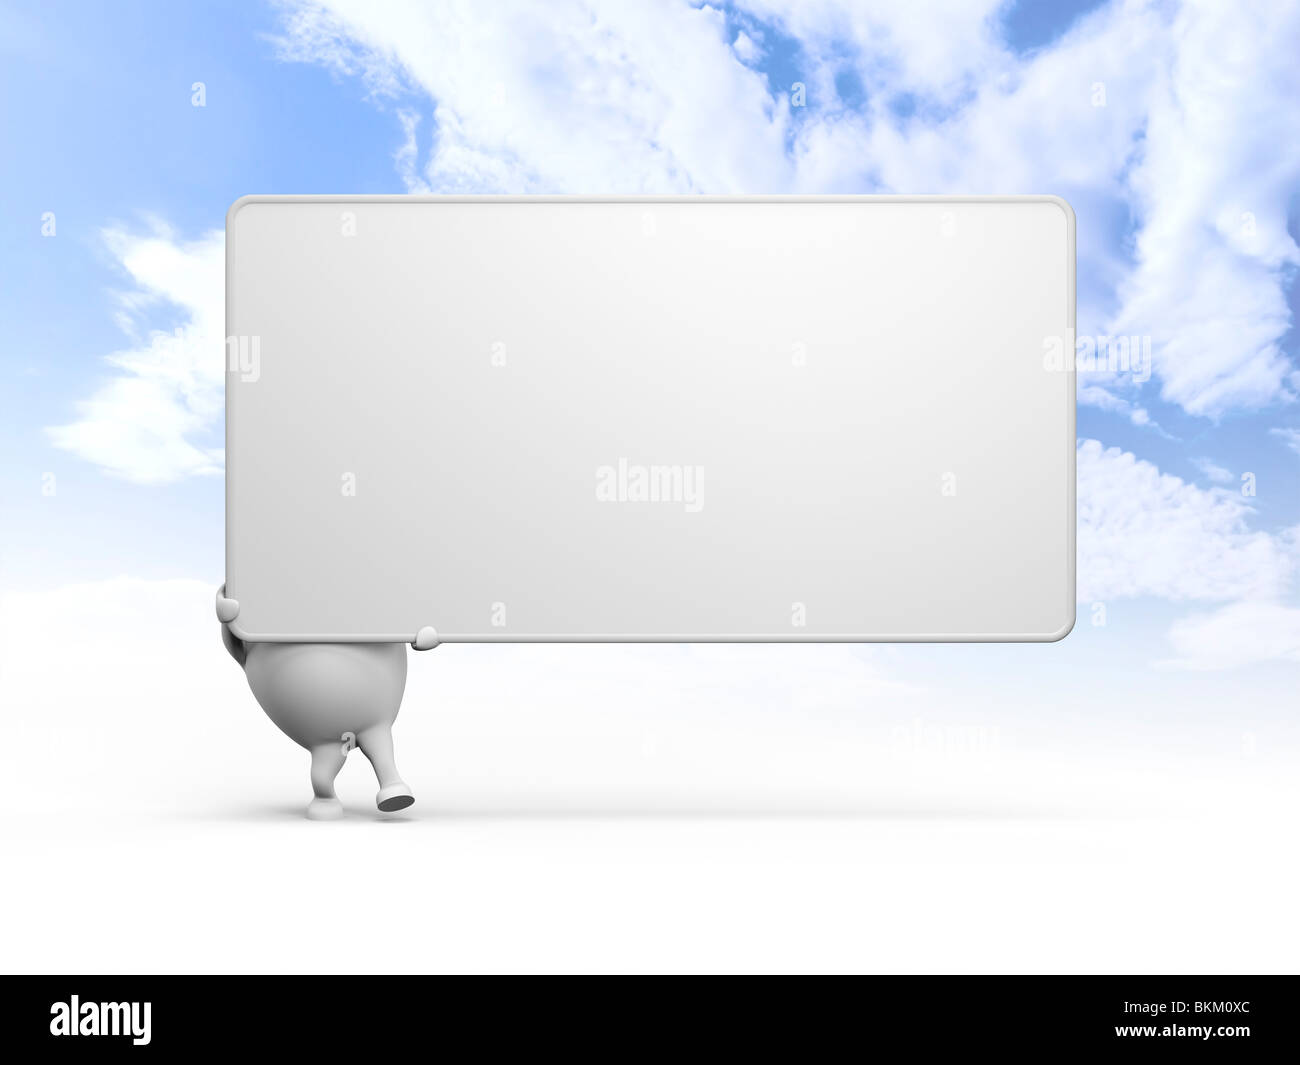 3D illustration of a cartoon character holding a large blank sign over blue sky background Stock Photo